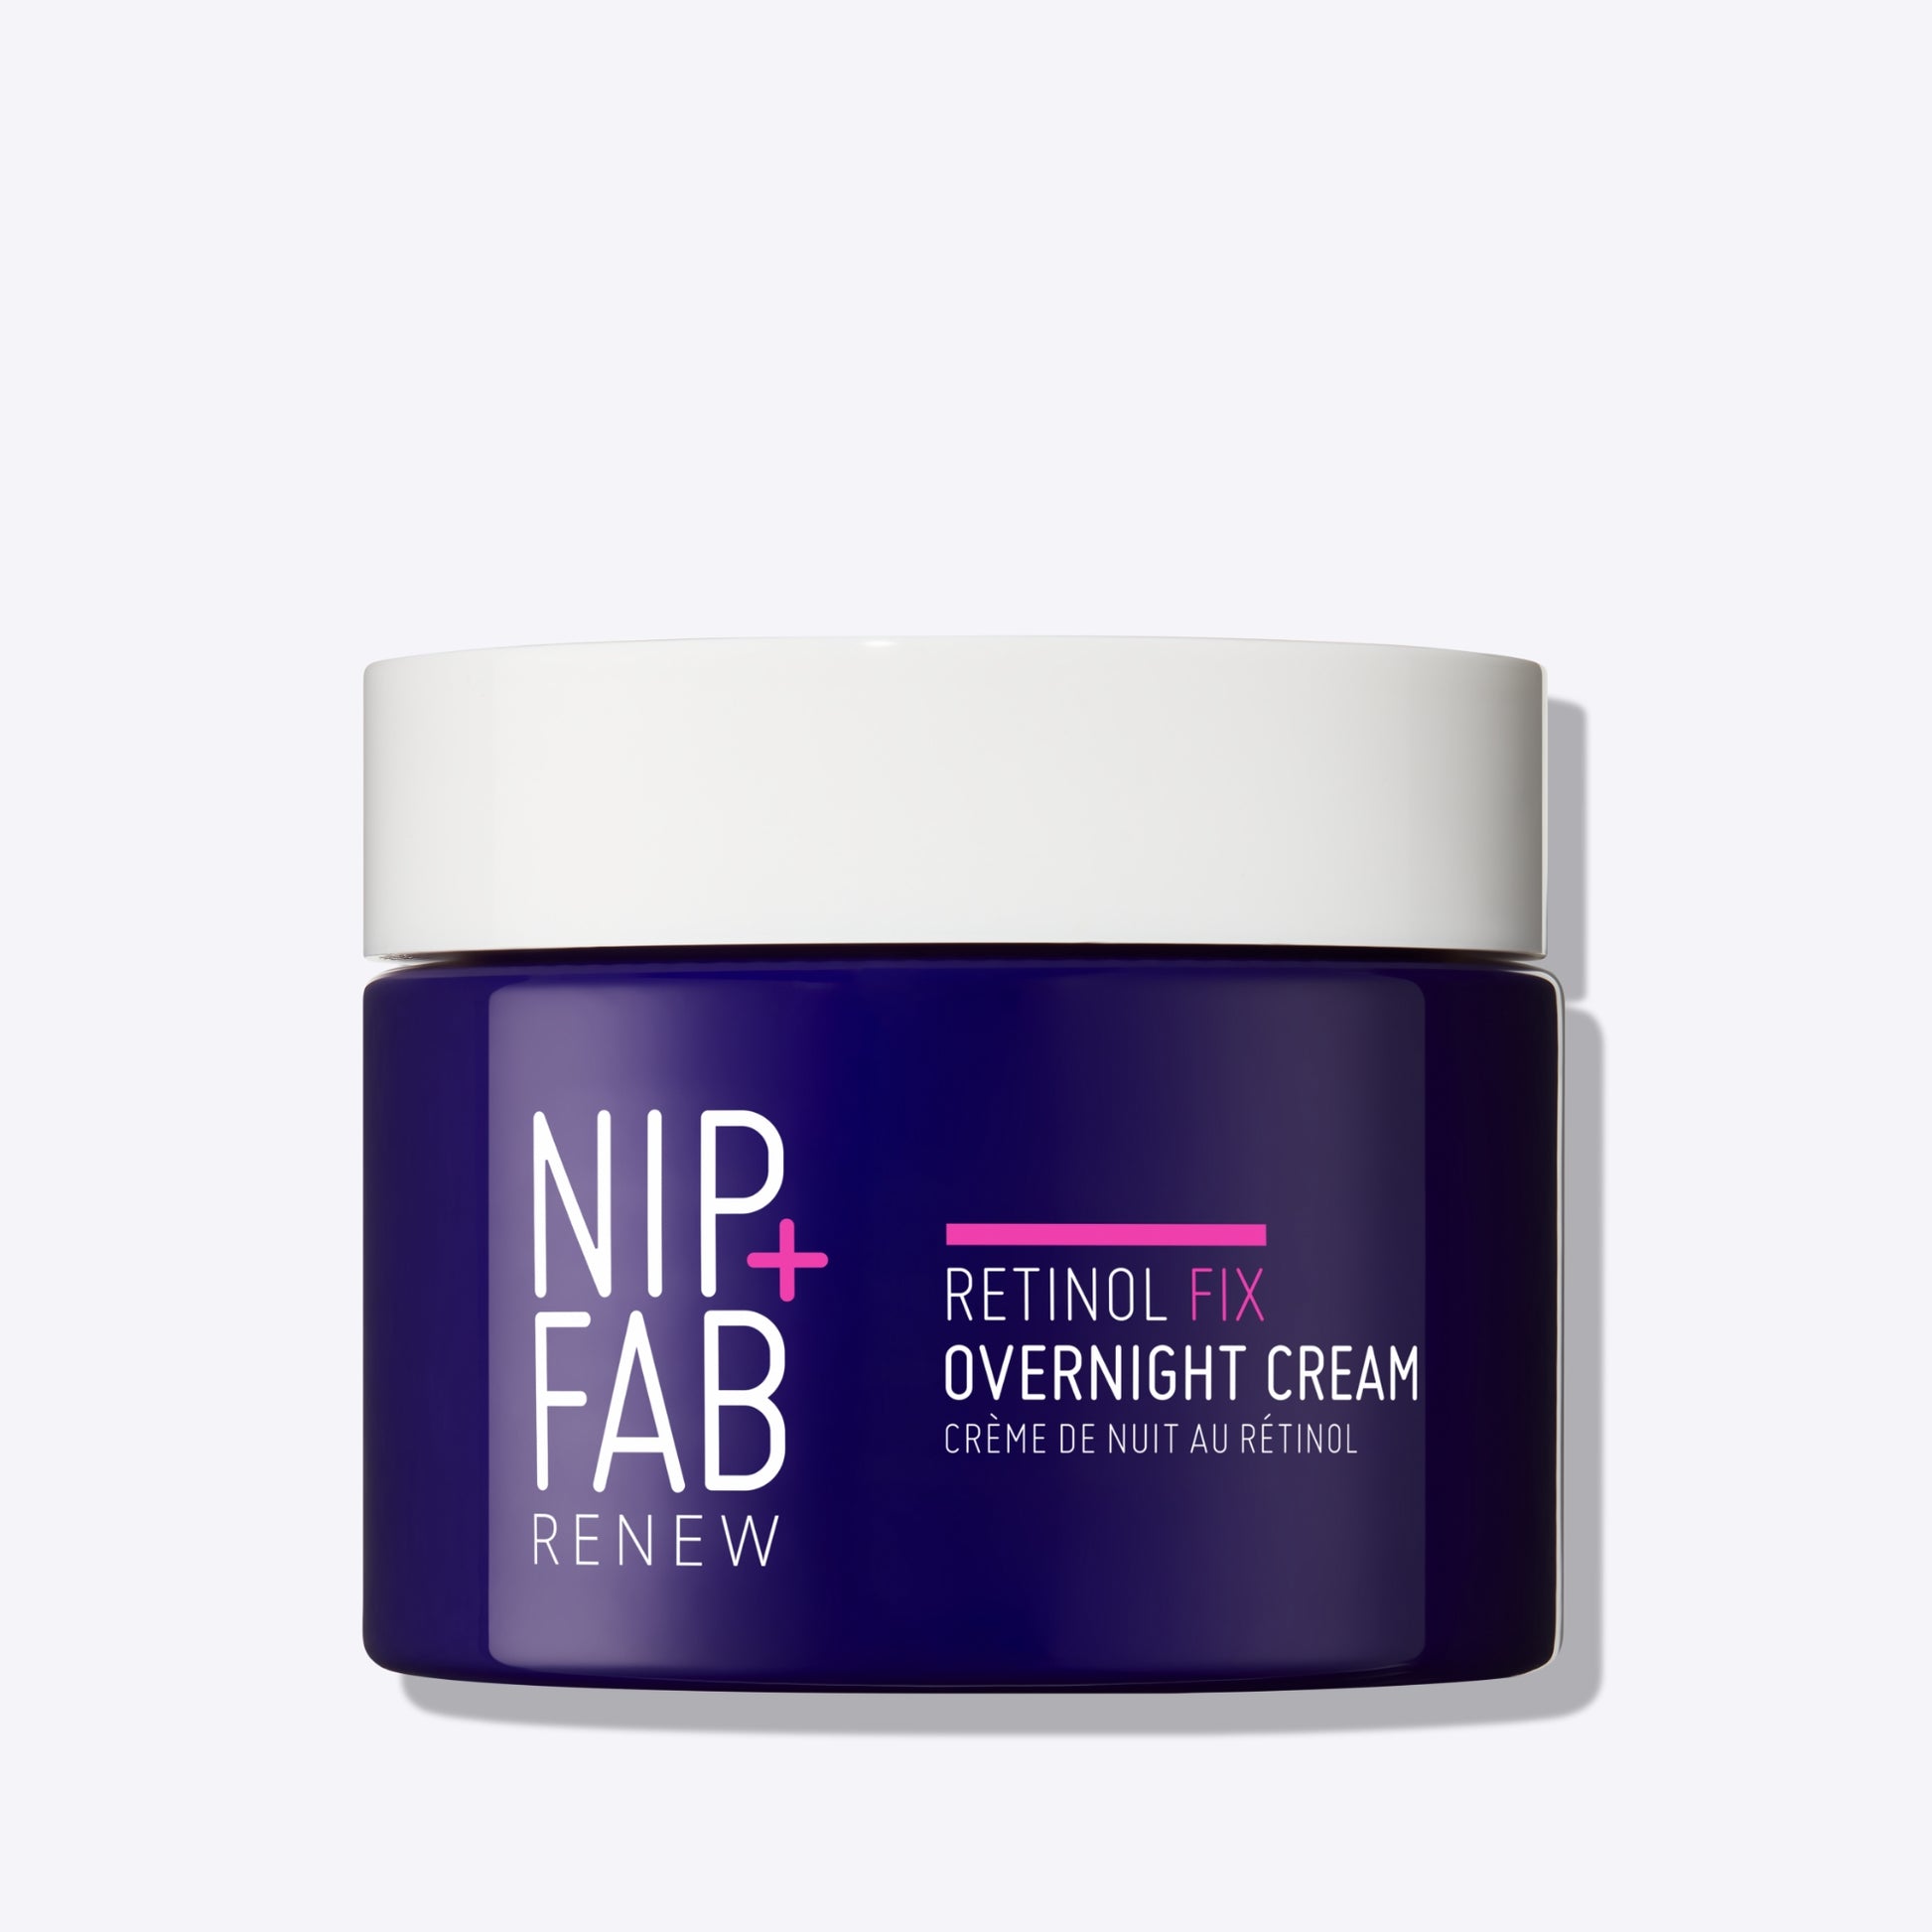 We tried Nip+Fab's new SPF moisturiser range across different skin types,  from oily to dry